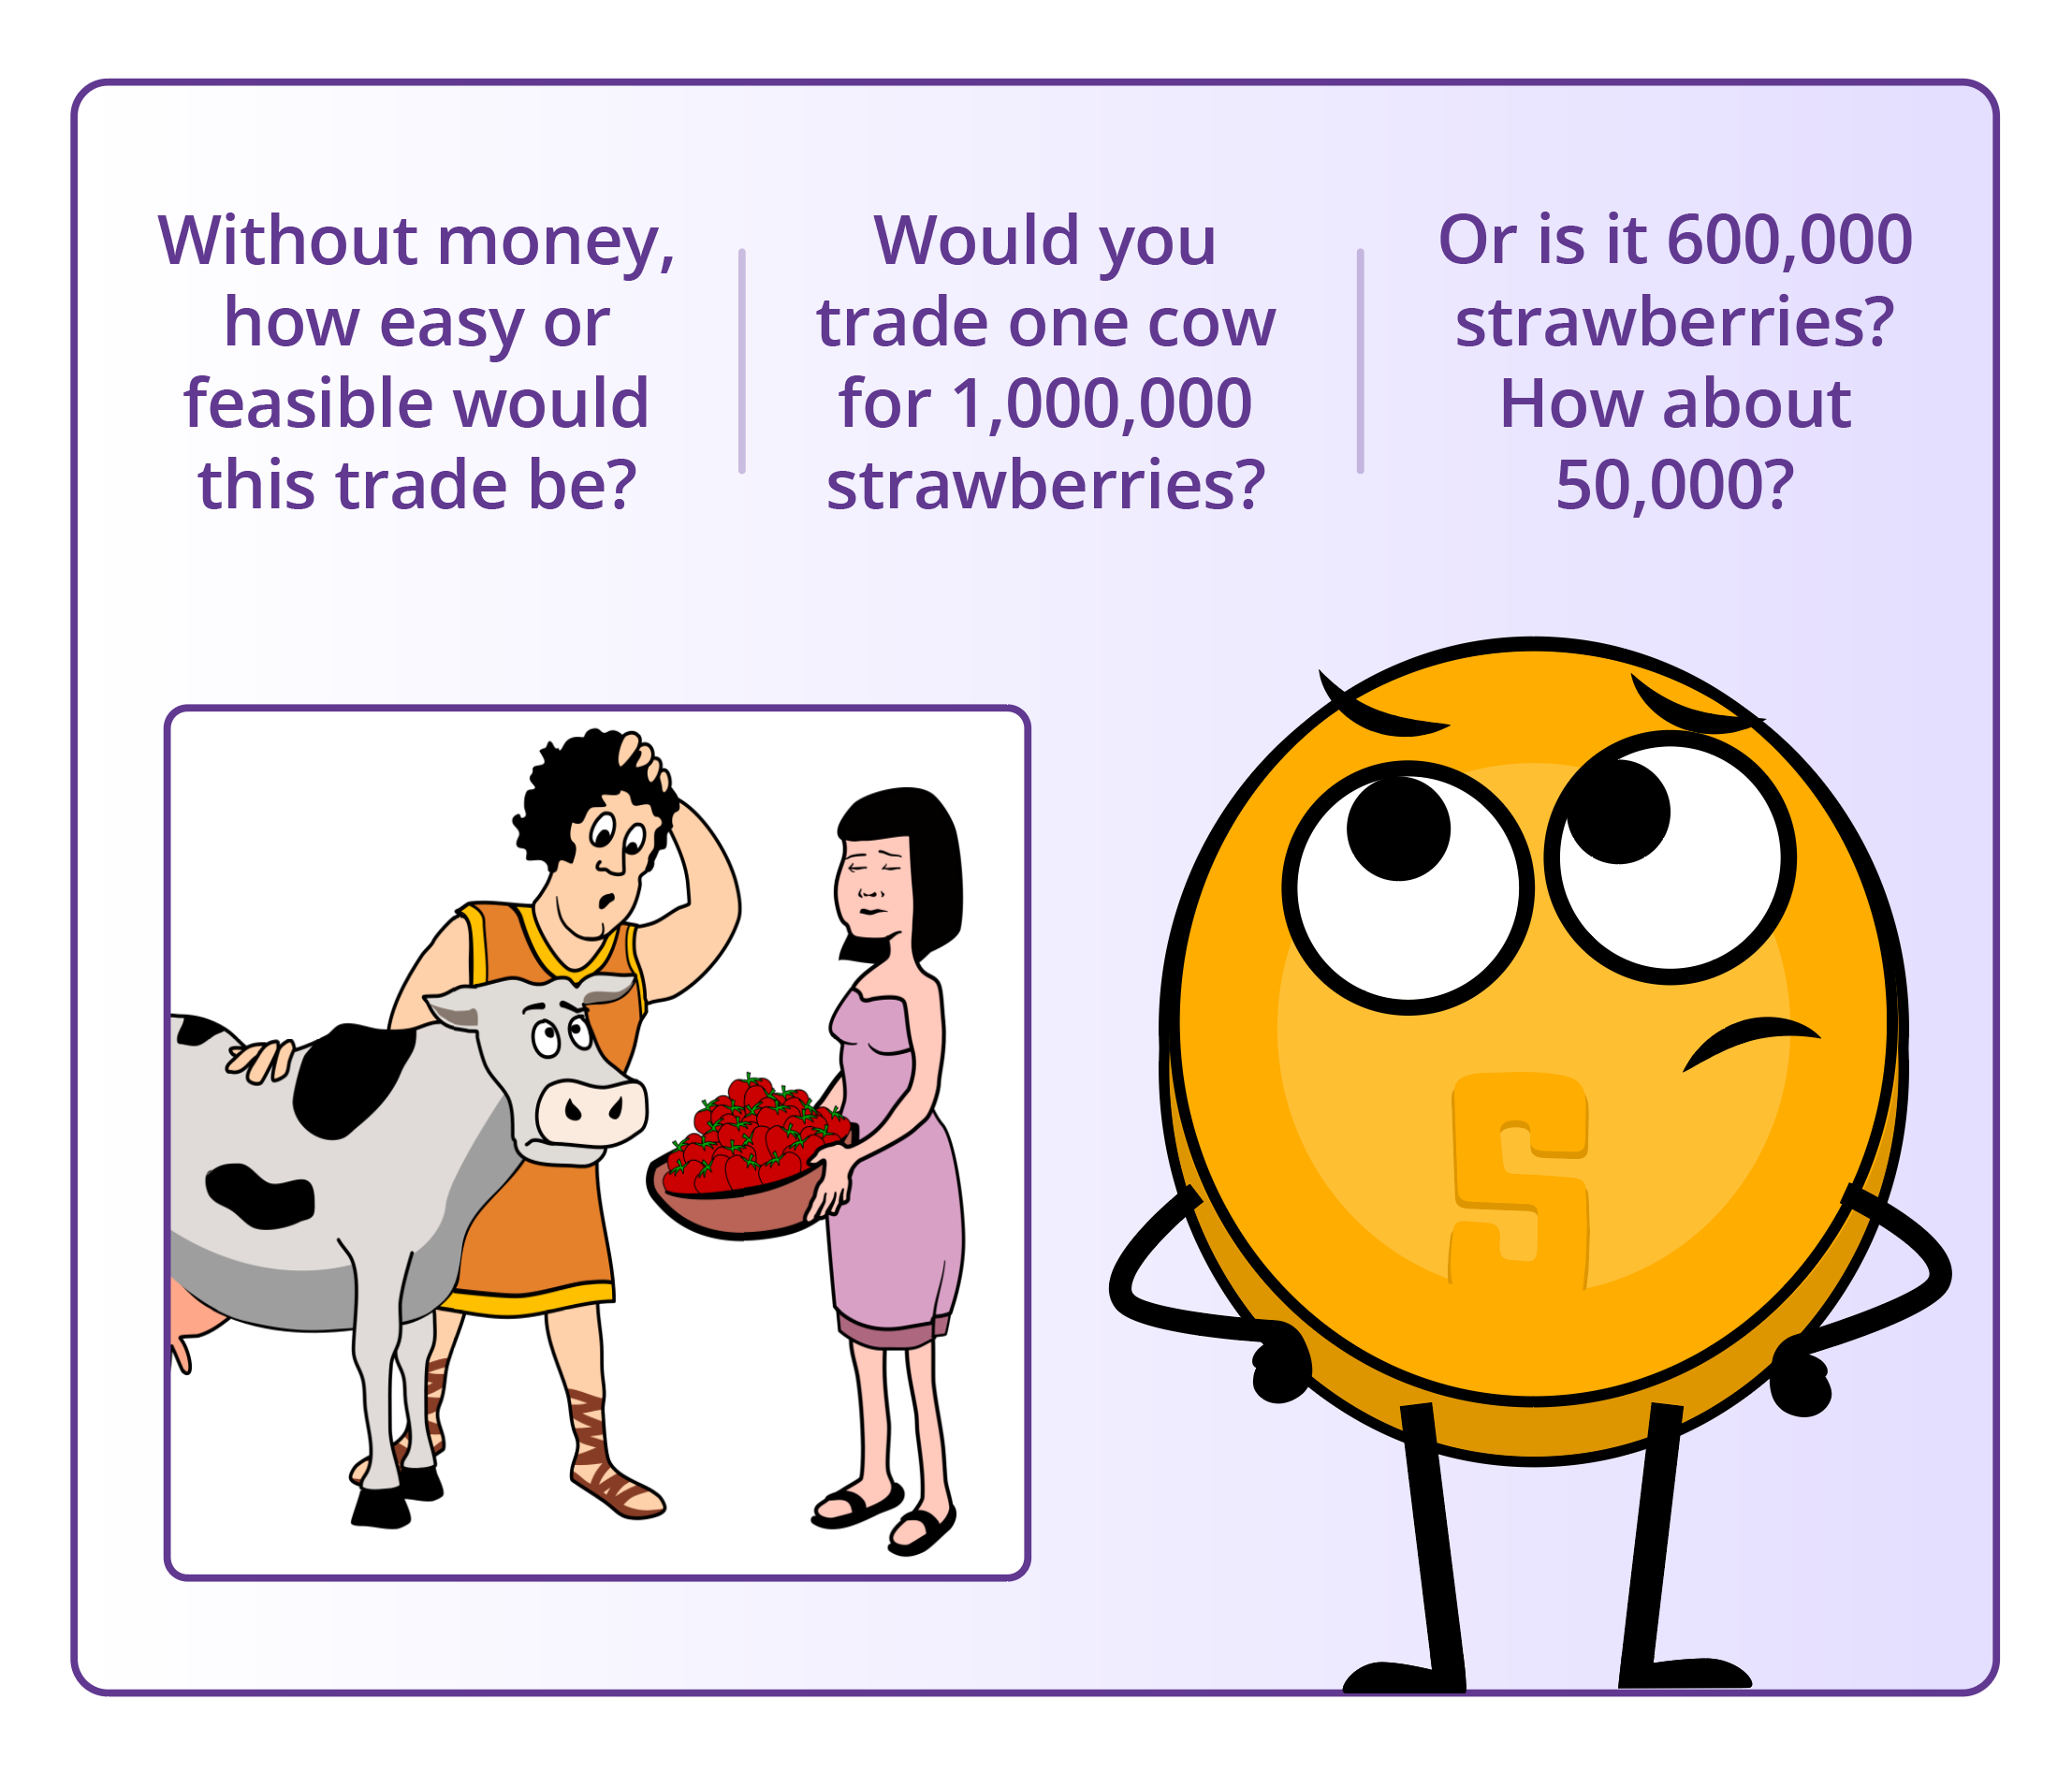 11.Trading-strawberries-for-a-cow-v2.png